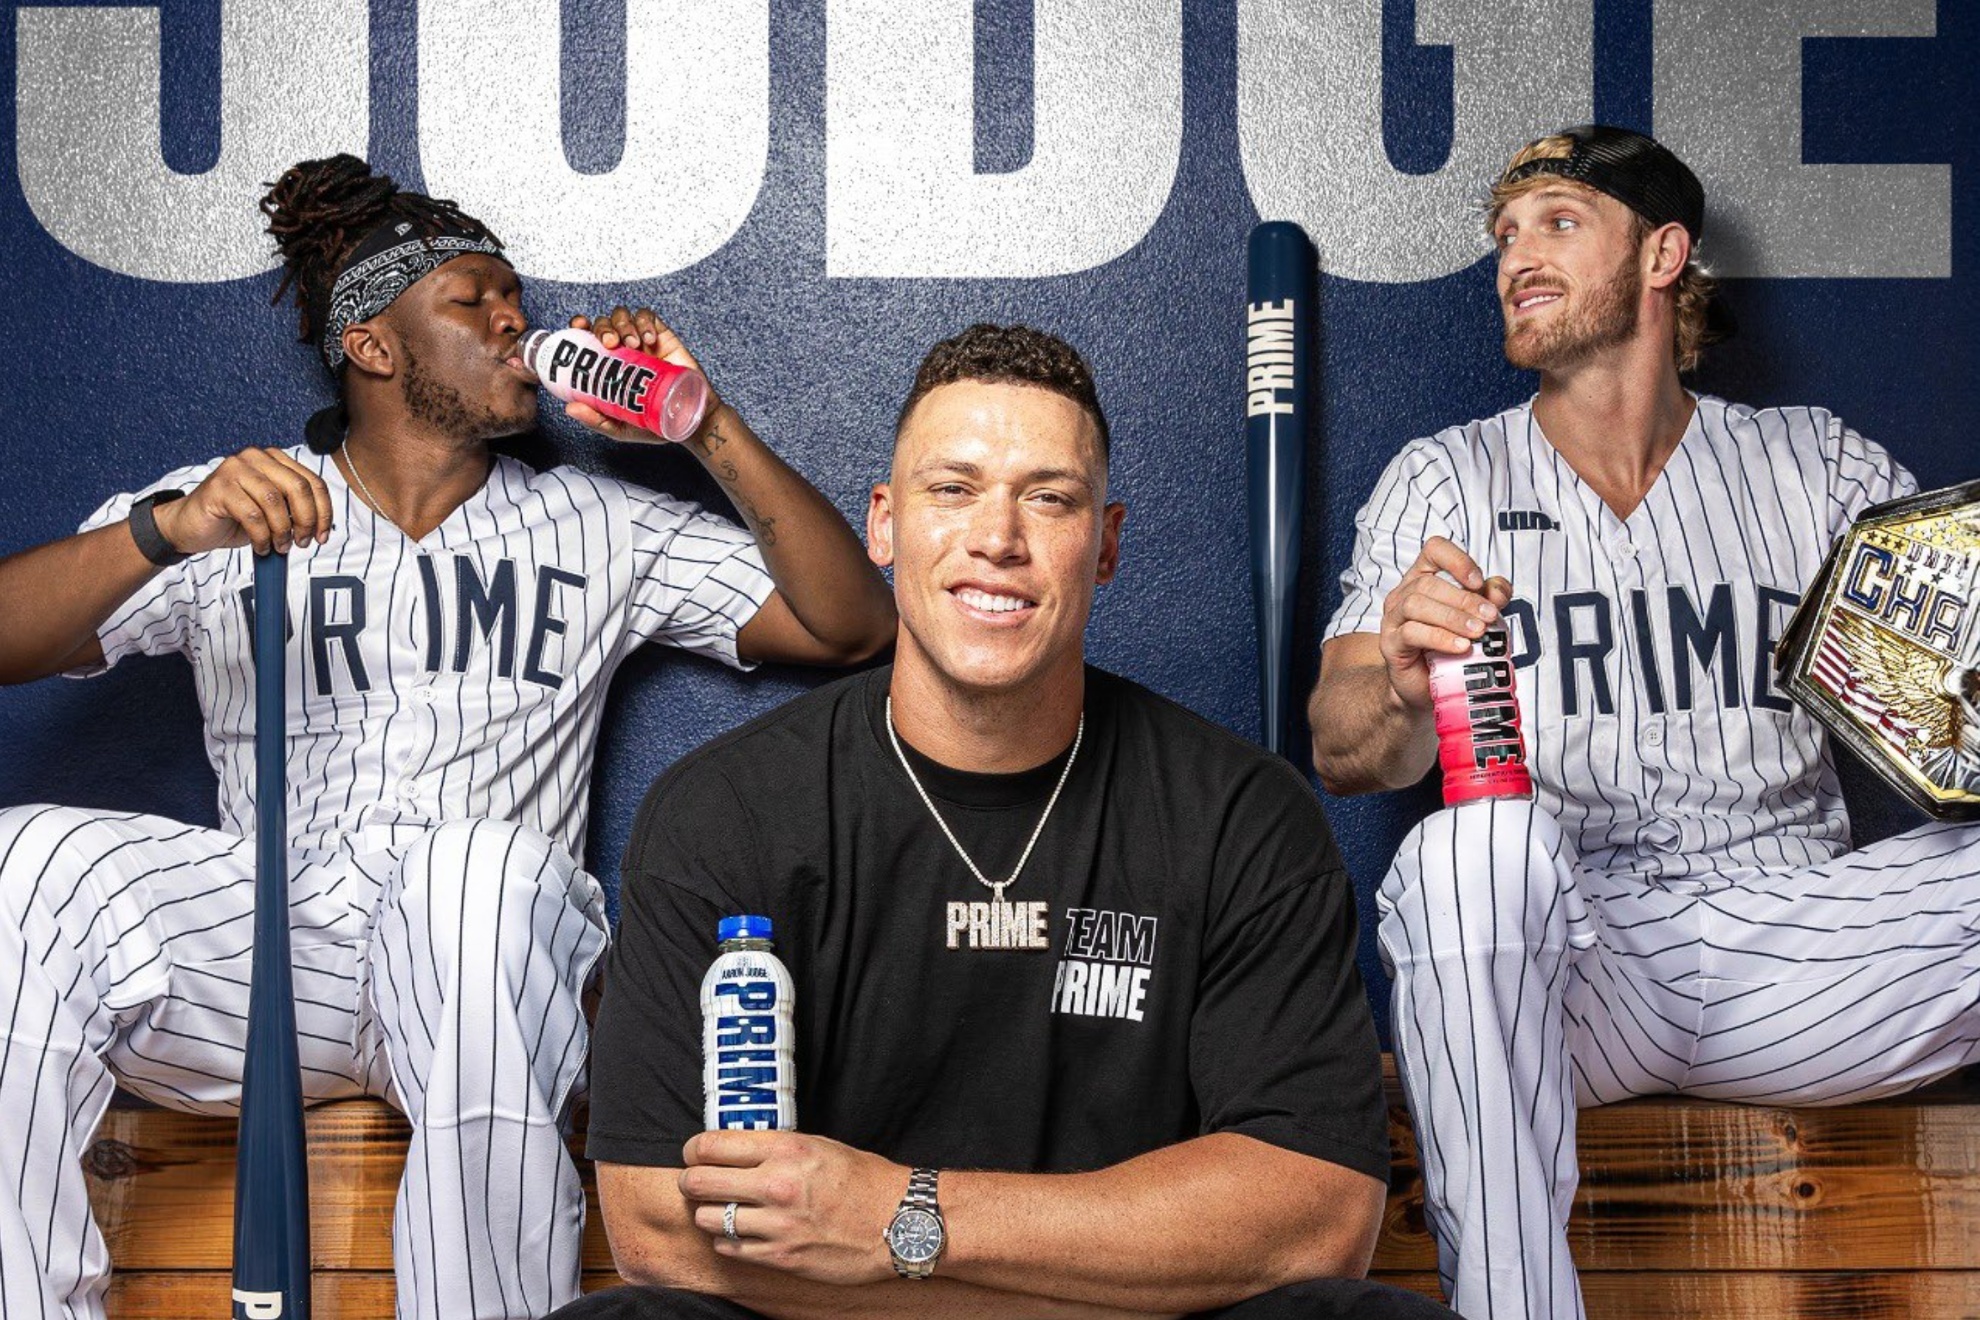 Aaron Judge is the new spokesperson for Logan Pauls PRIME energy drink